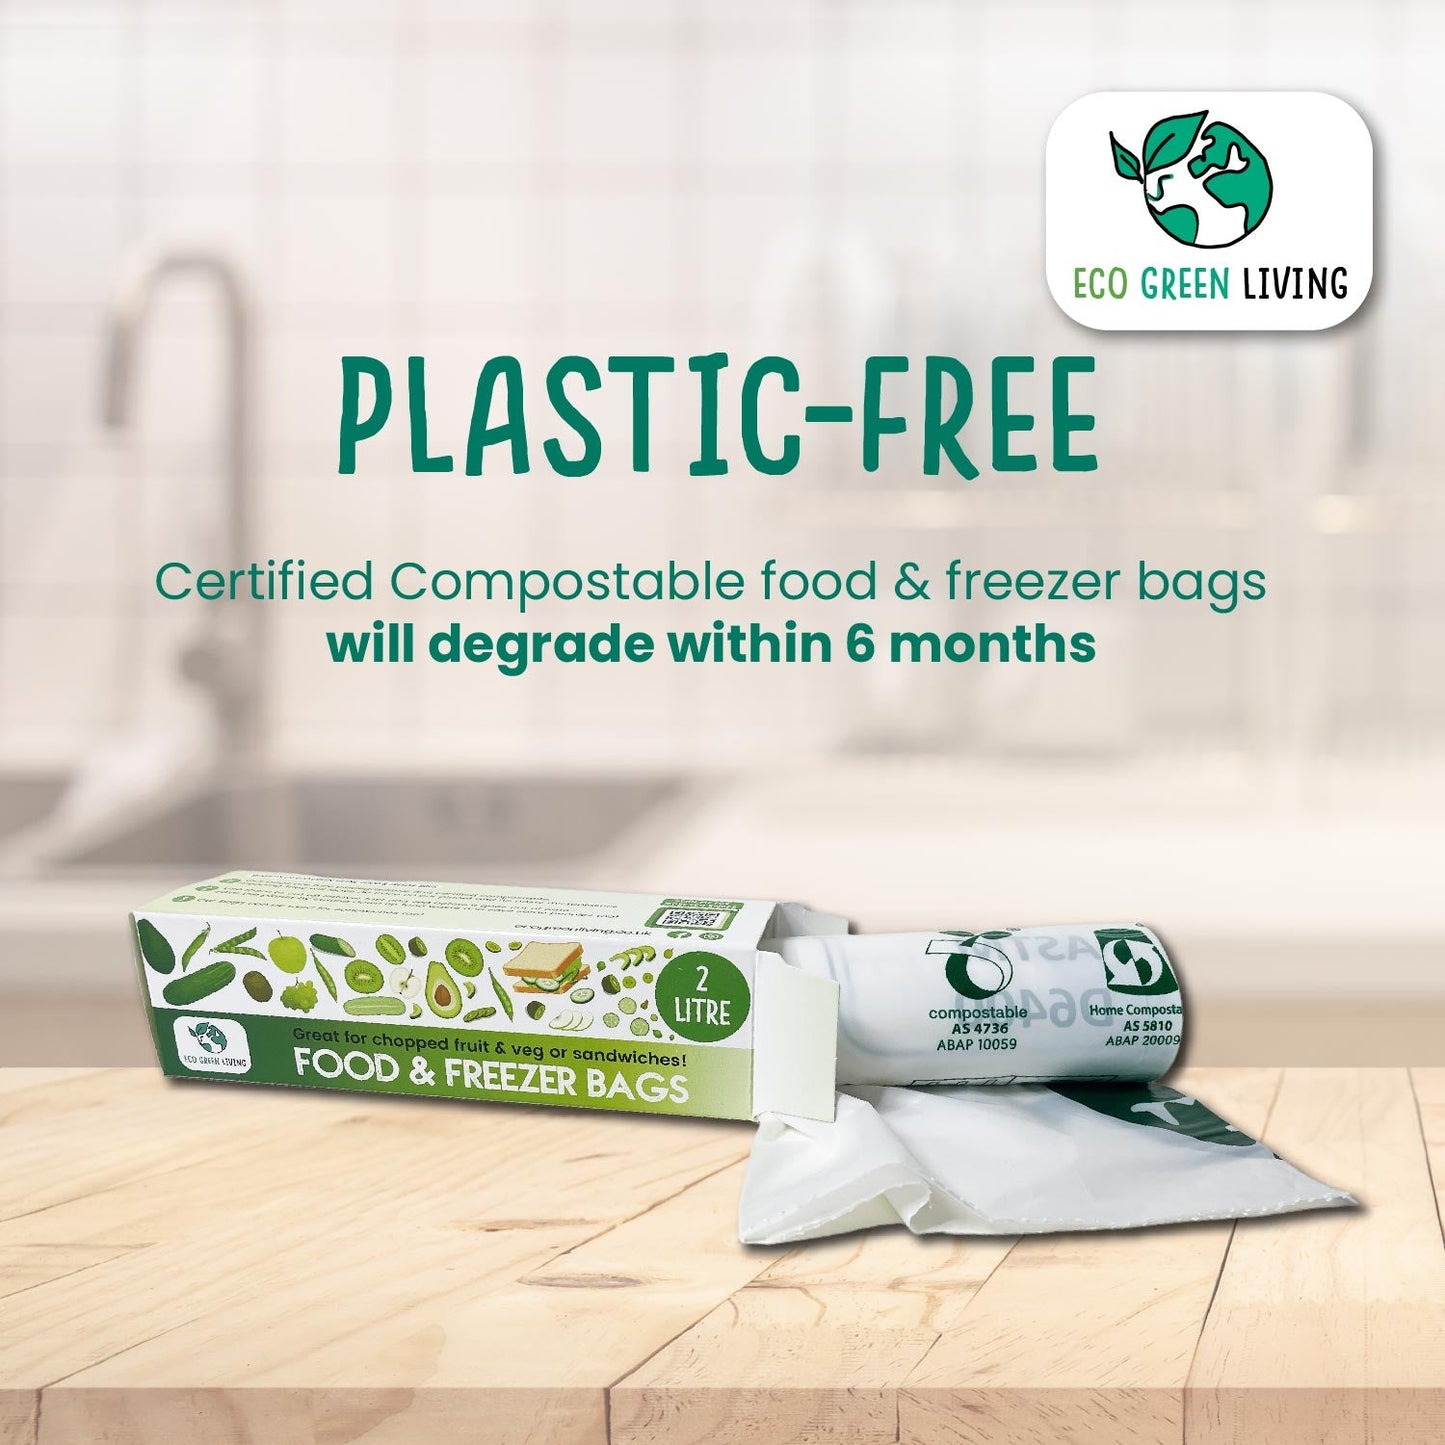 Certified Compostable Food & Freezer Bags 6 Litre (20 bags) - Eco Green Living